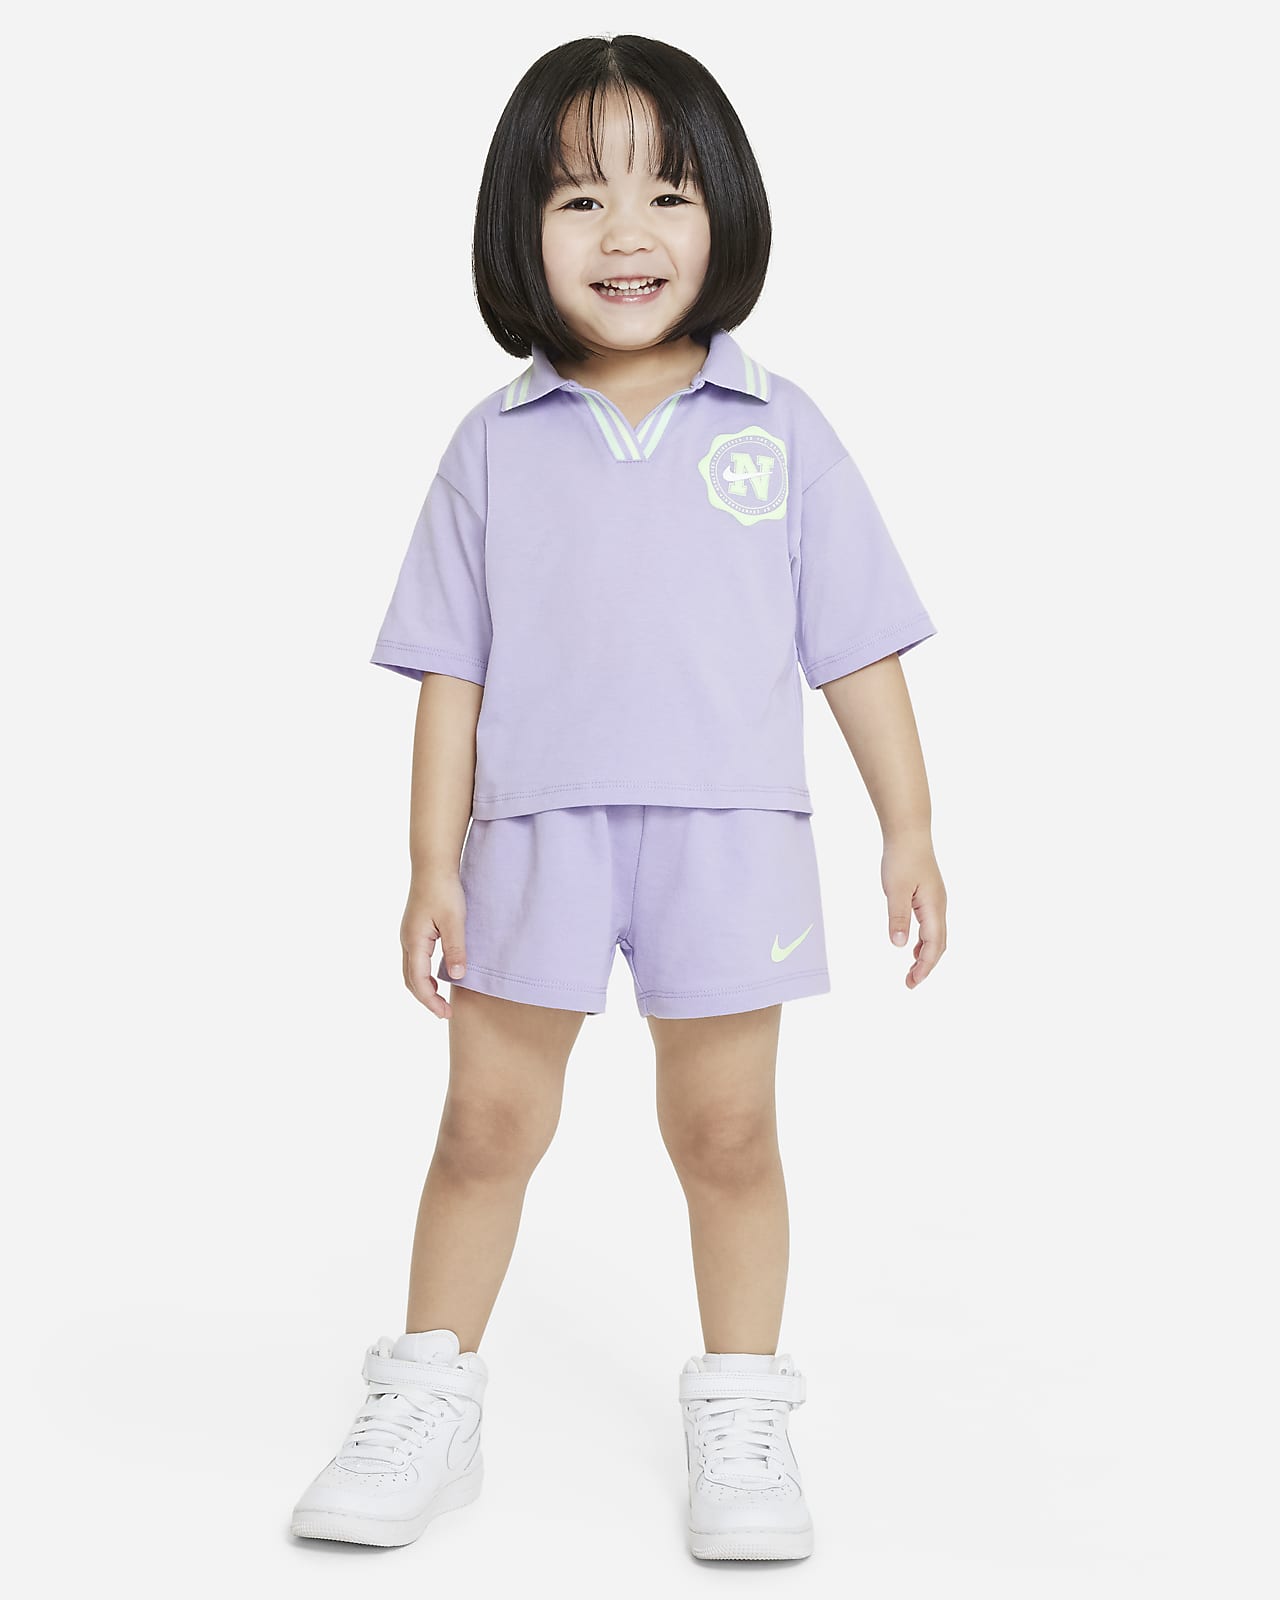 Nike Prep in Your Step Toddler Shorts Set